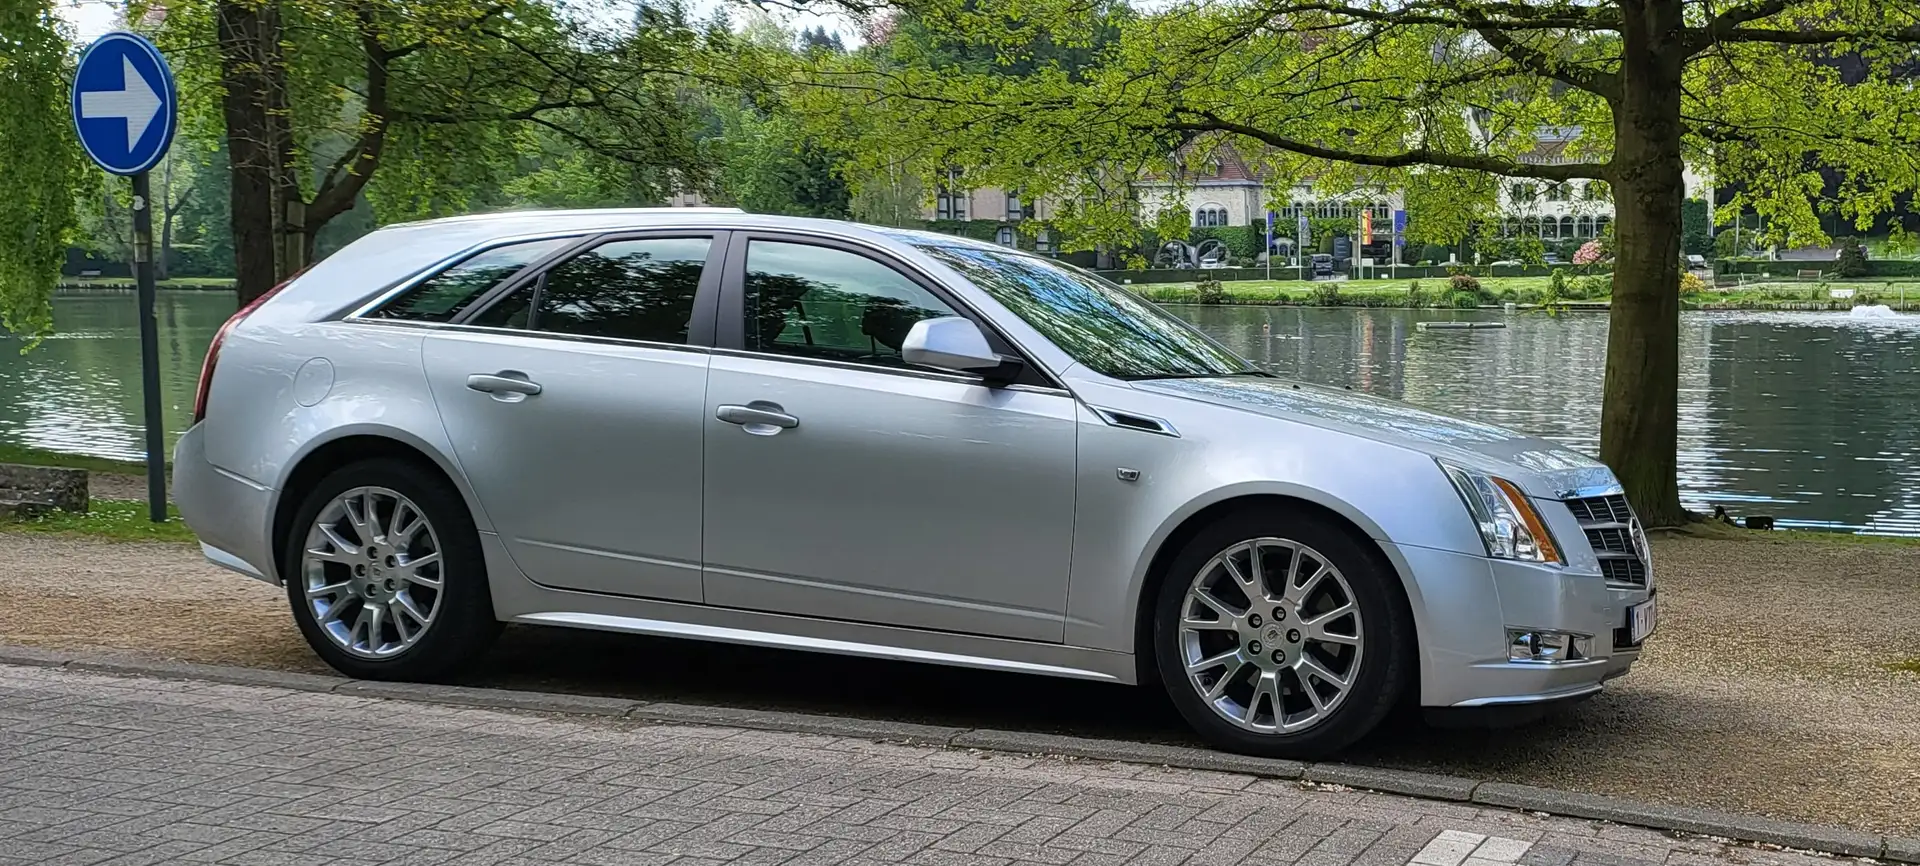 Cadillac CTS CTS 3.6 V6 Sport Wagon Lichte Vracht/Camionnette Zilver - 2